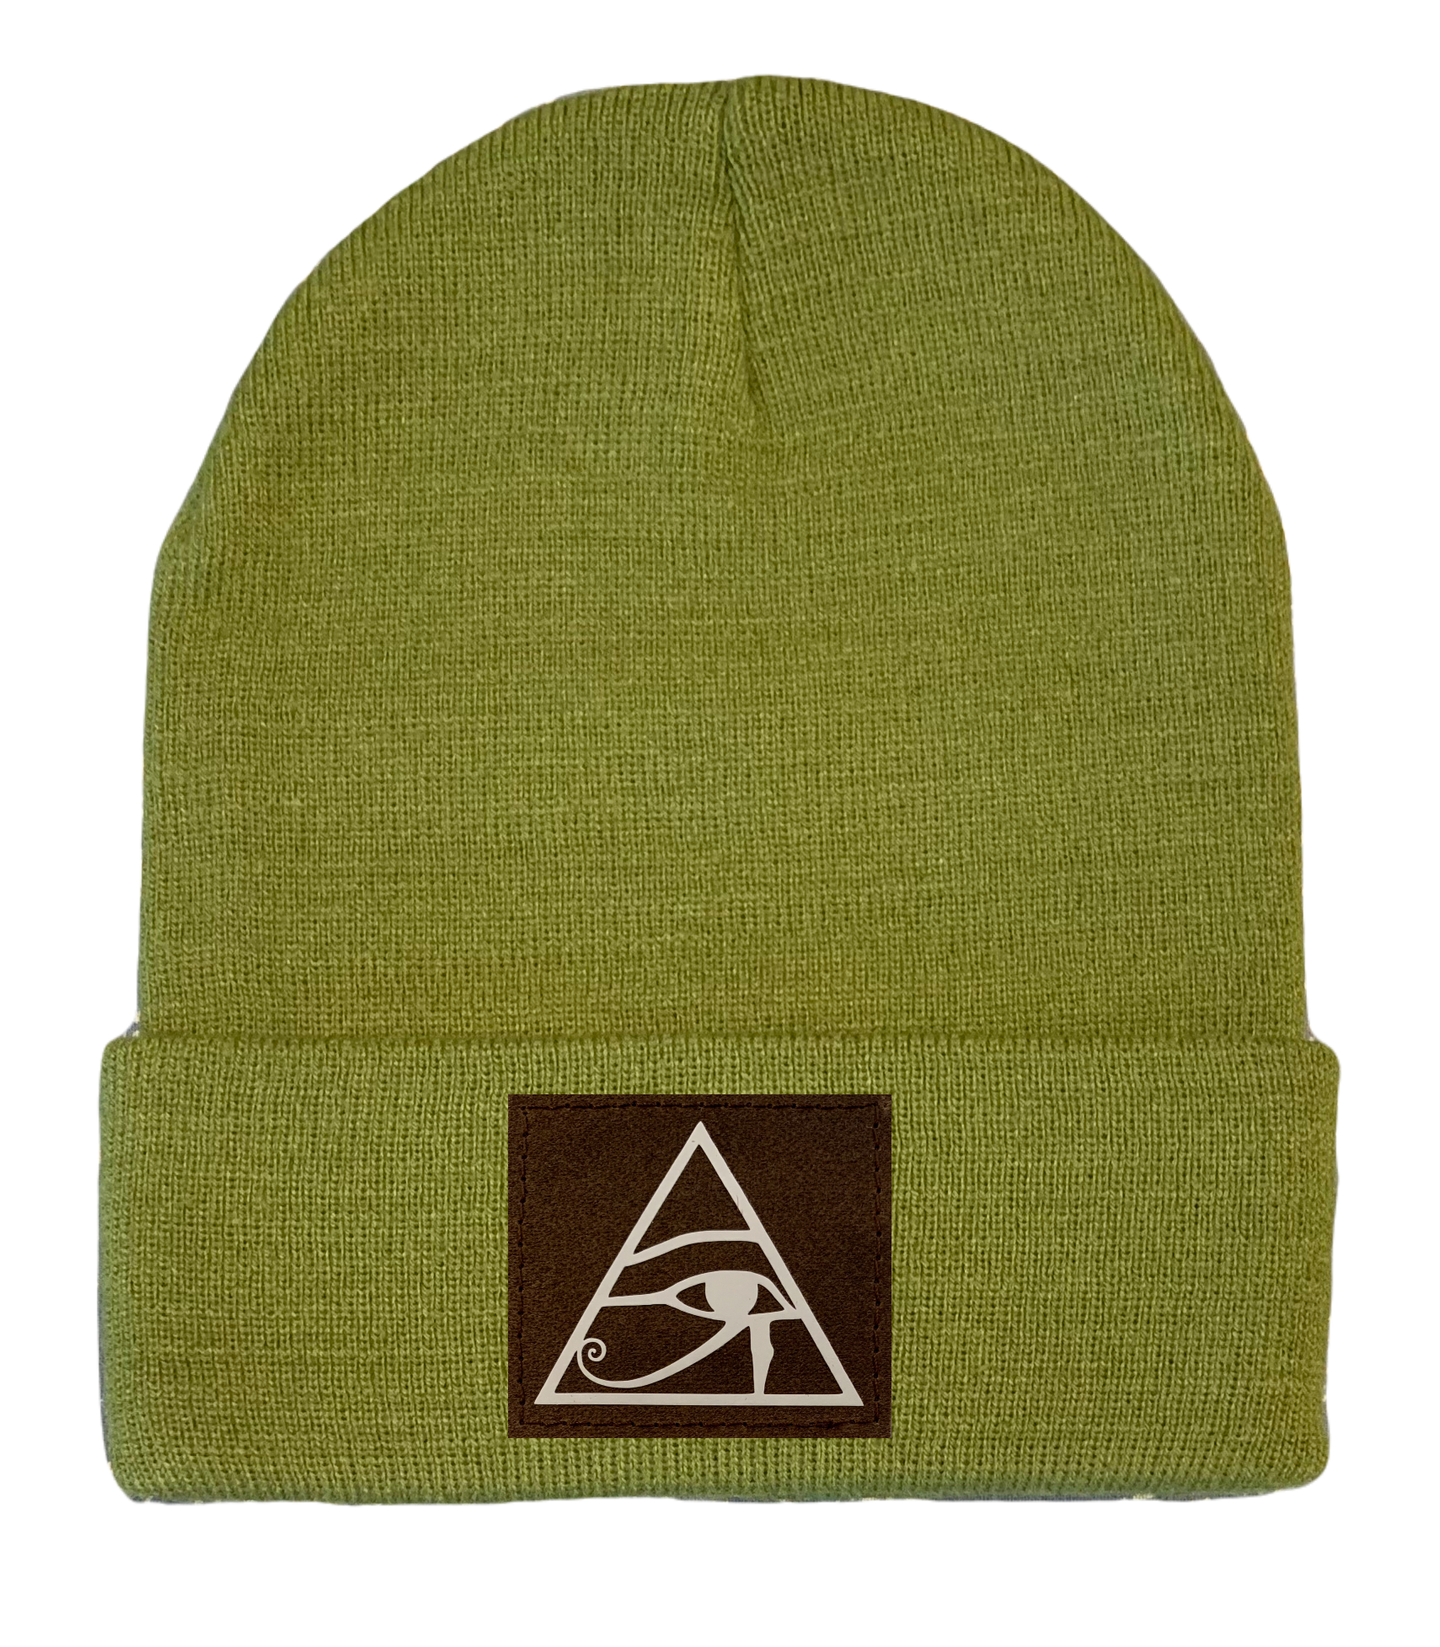 cuffed beanie knitted winter hat with eye of Horus  by Buddha Gear 